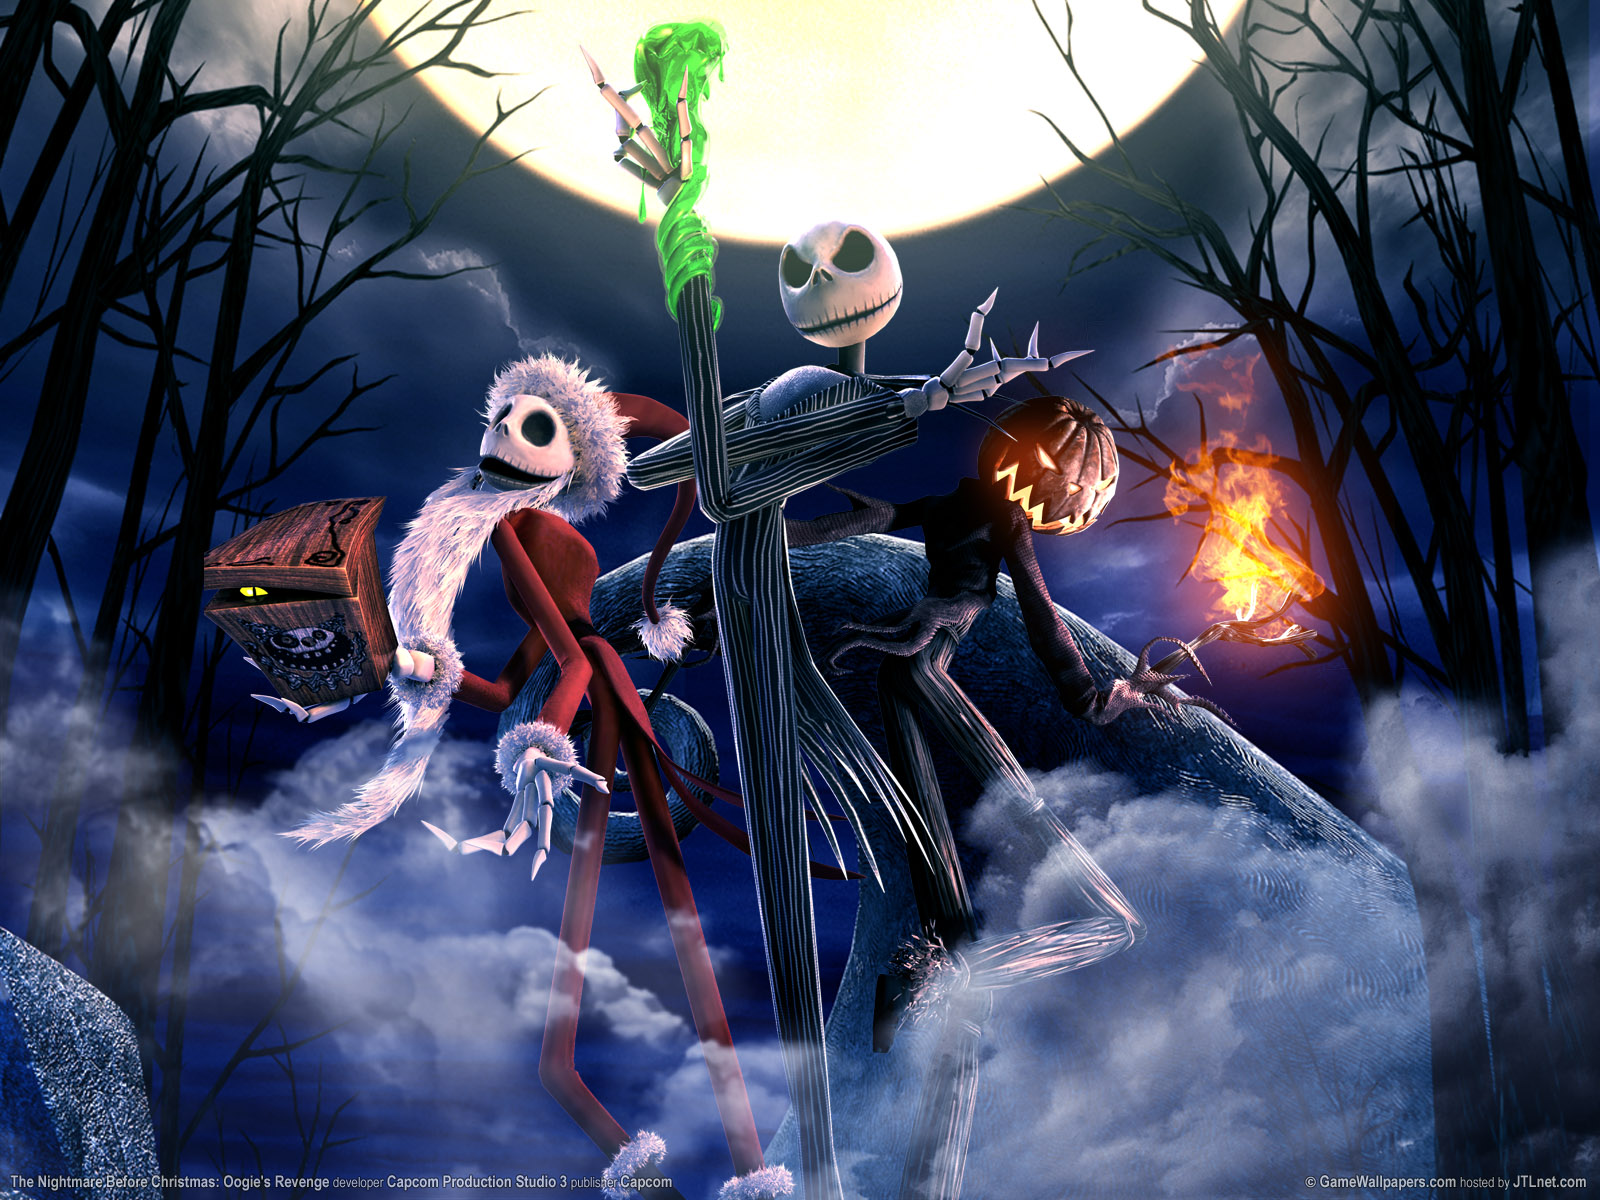 GAME]The Nightmare Before Christmas: Oogie's Revenge